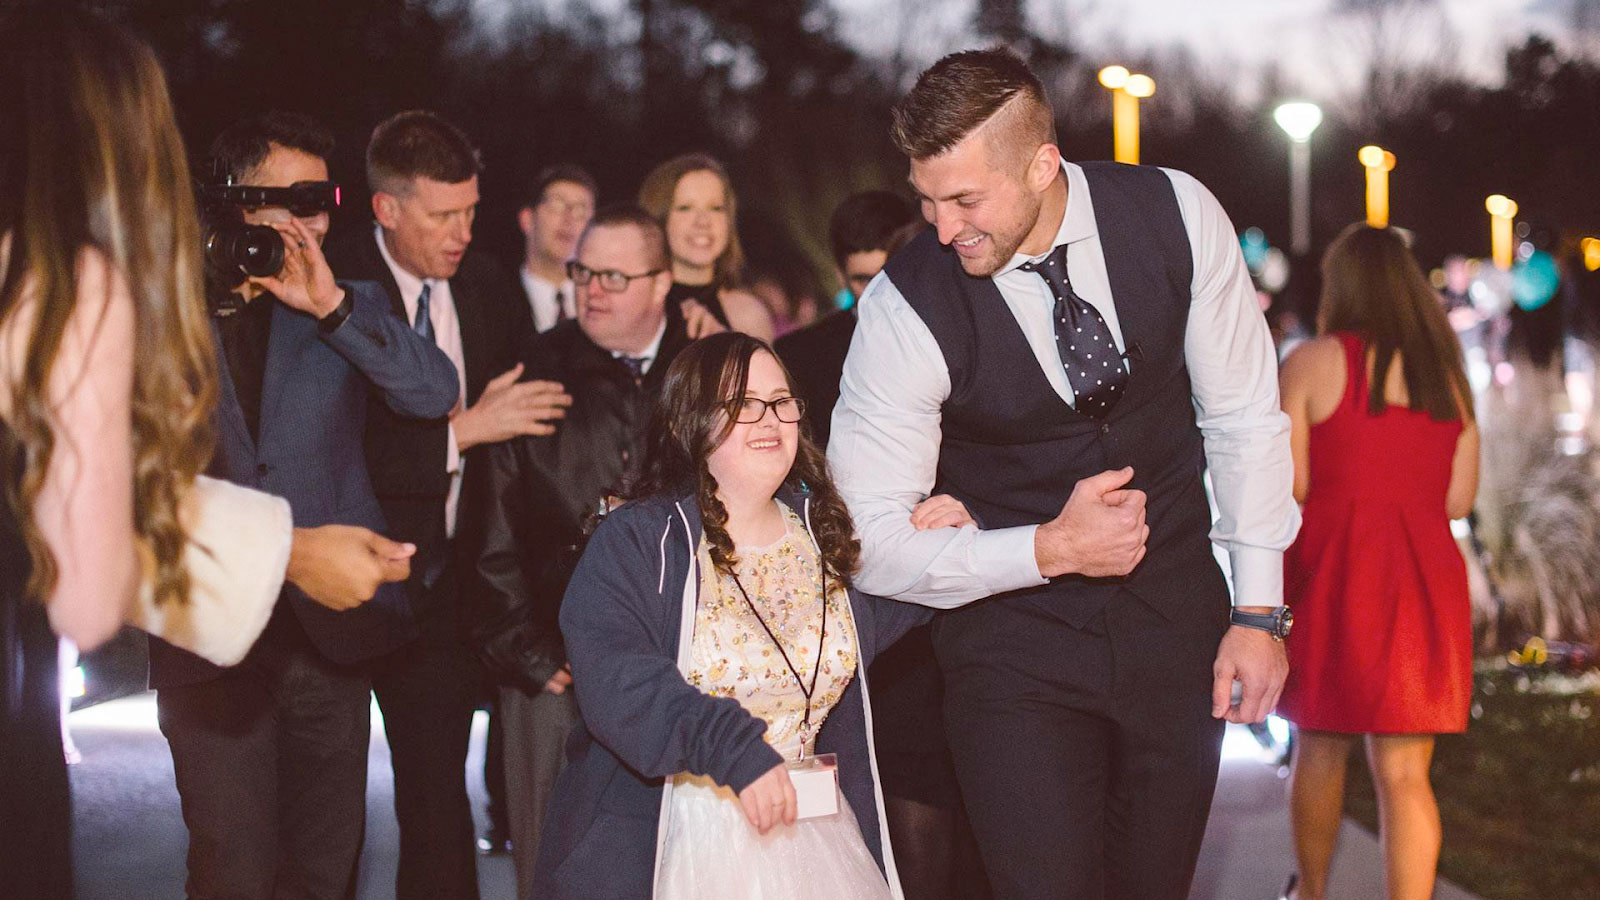 Tim Tebow dressed up and escorting a young lady to prom